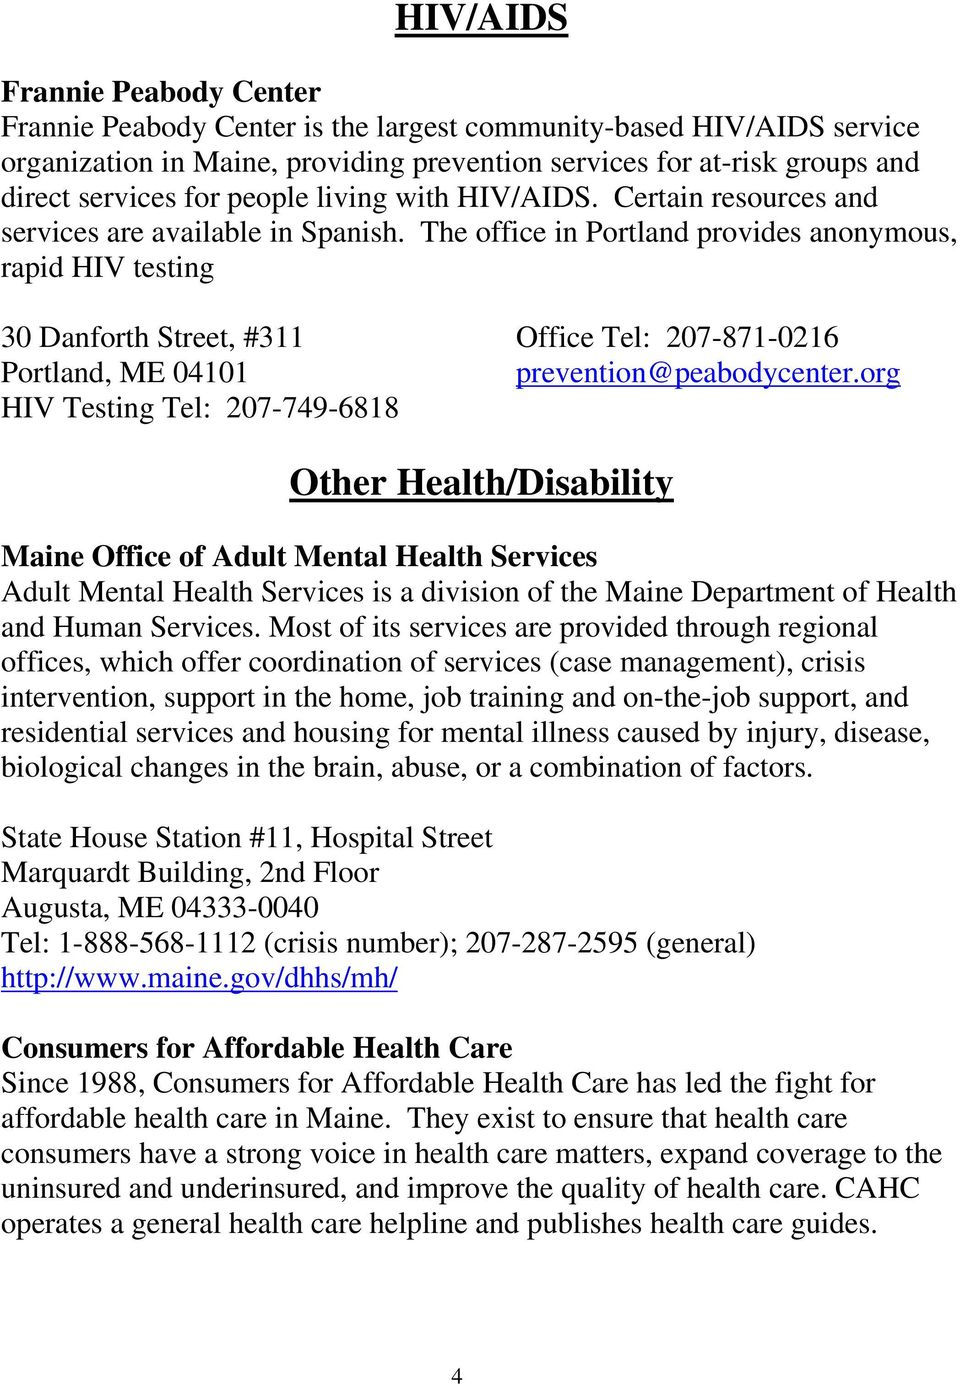 The office in Portland provides anonymous, rapid HIV testing 30 Danforth Street, #311 Portland, ME 04101 HIV Testing Tel: 207-749-6818 Office Tel: 207-871-0216 prevention@peabodycenter.